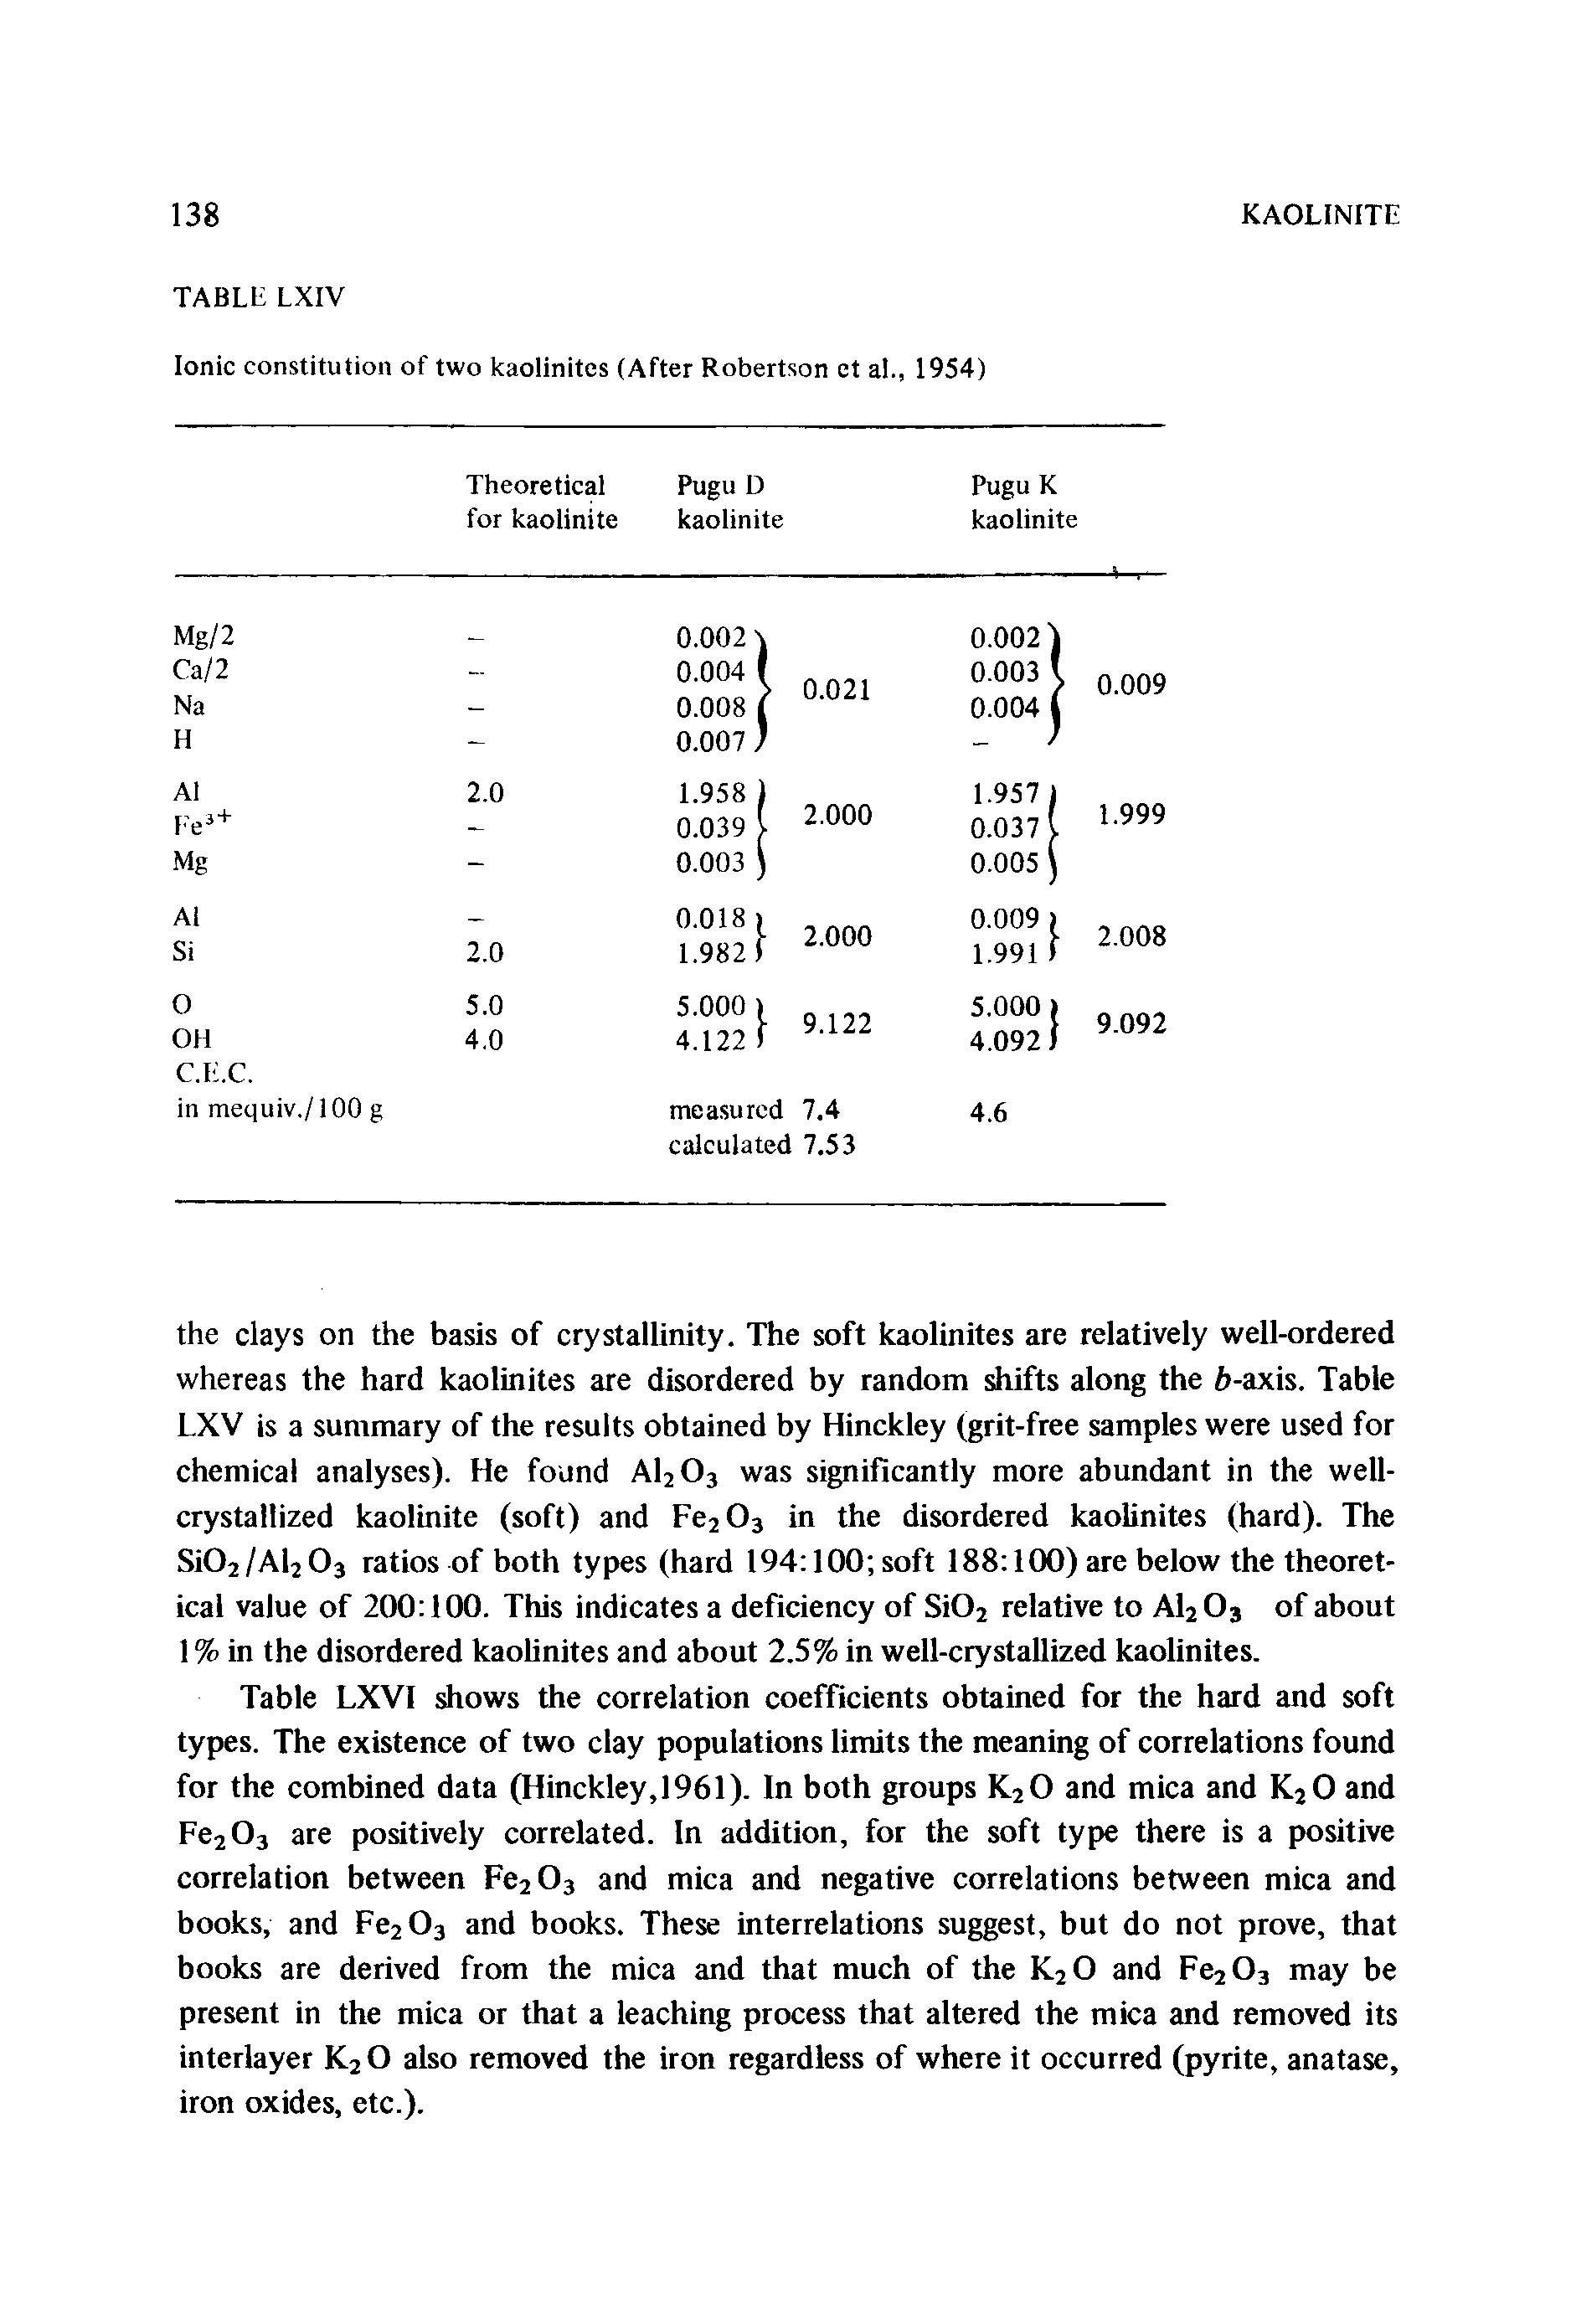 Table LXVI shows the correlation coefficients obtained for the hard and soft types. The existence of two clay populations limits the meaning of correlations found for the combined data (Hinckley, 1961). In both groups K20 and mica and K20 and Fe203 are positively correlated. In addition, for the soft type there is a positive correlation between Fe203 and mica and negative correlations between mica and books, and Fe203 and books. These interrelations suggest, but do not prove, that books are derived from the mica and that much of the K20 and Fe203 may be present in the mica or that a leaching process that altered the mica and removed its interlayer K20 also removed the iron regardless of where it occurred (pyrite, anatase, iron oxides, etc.).